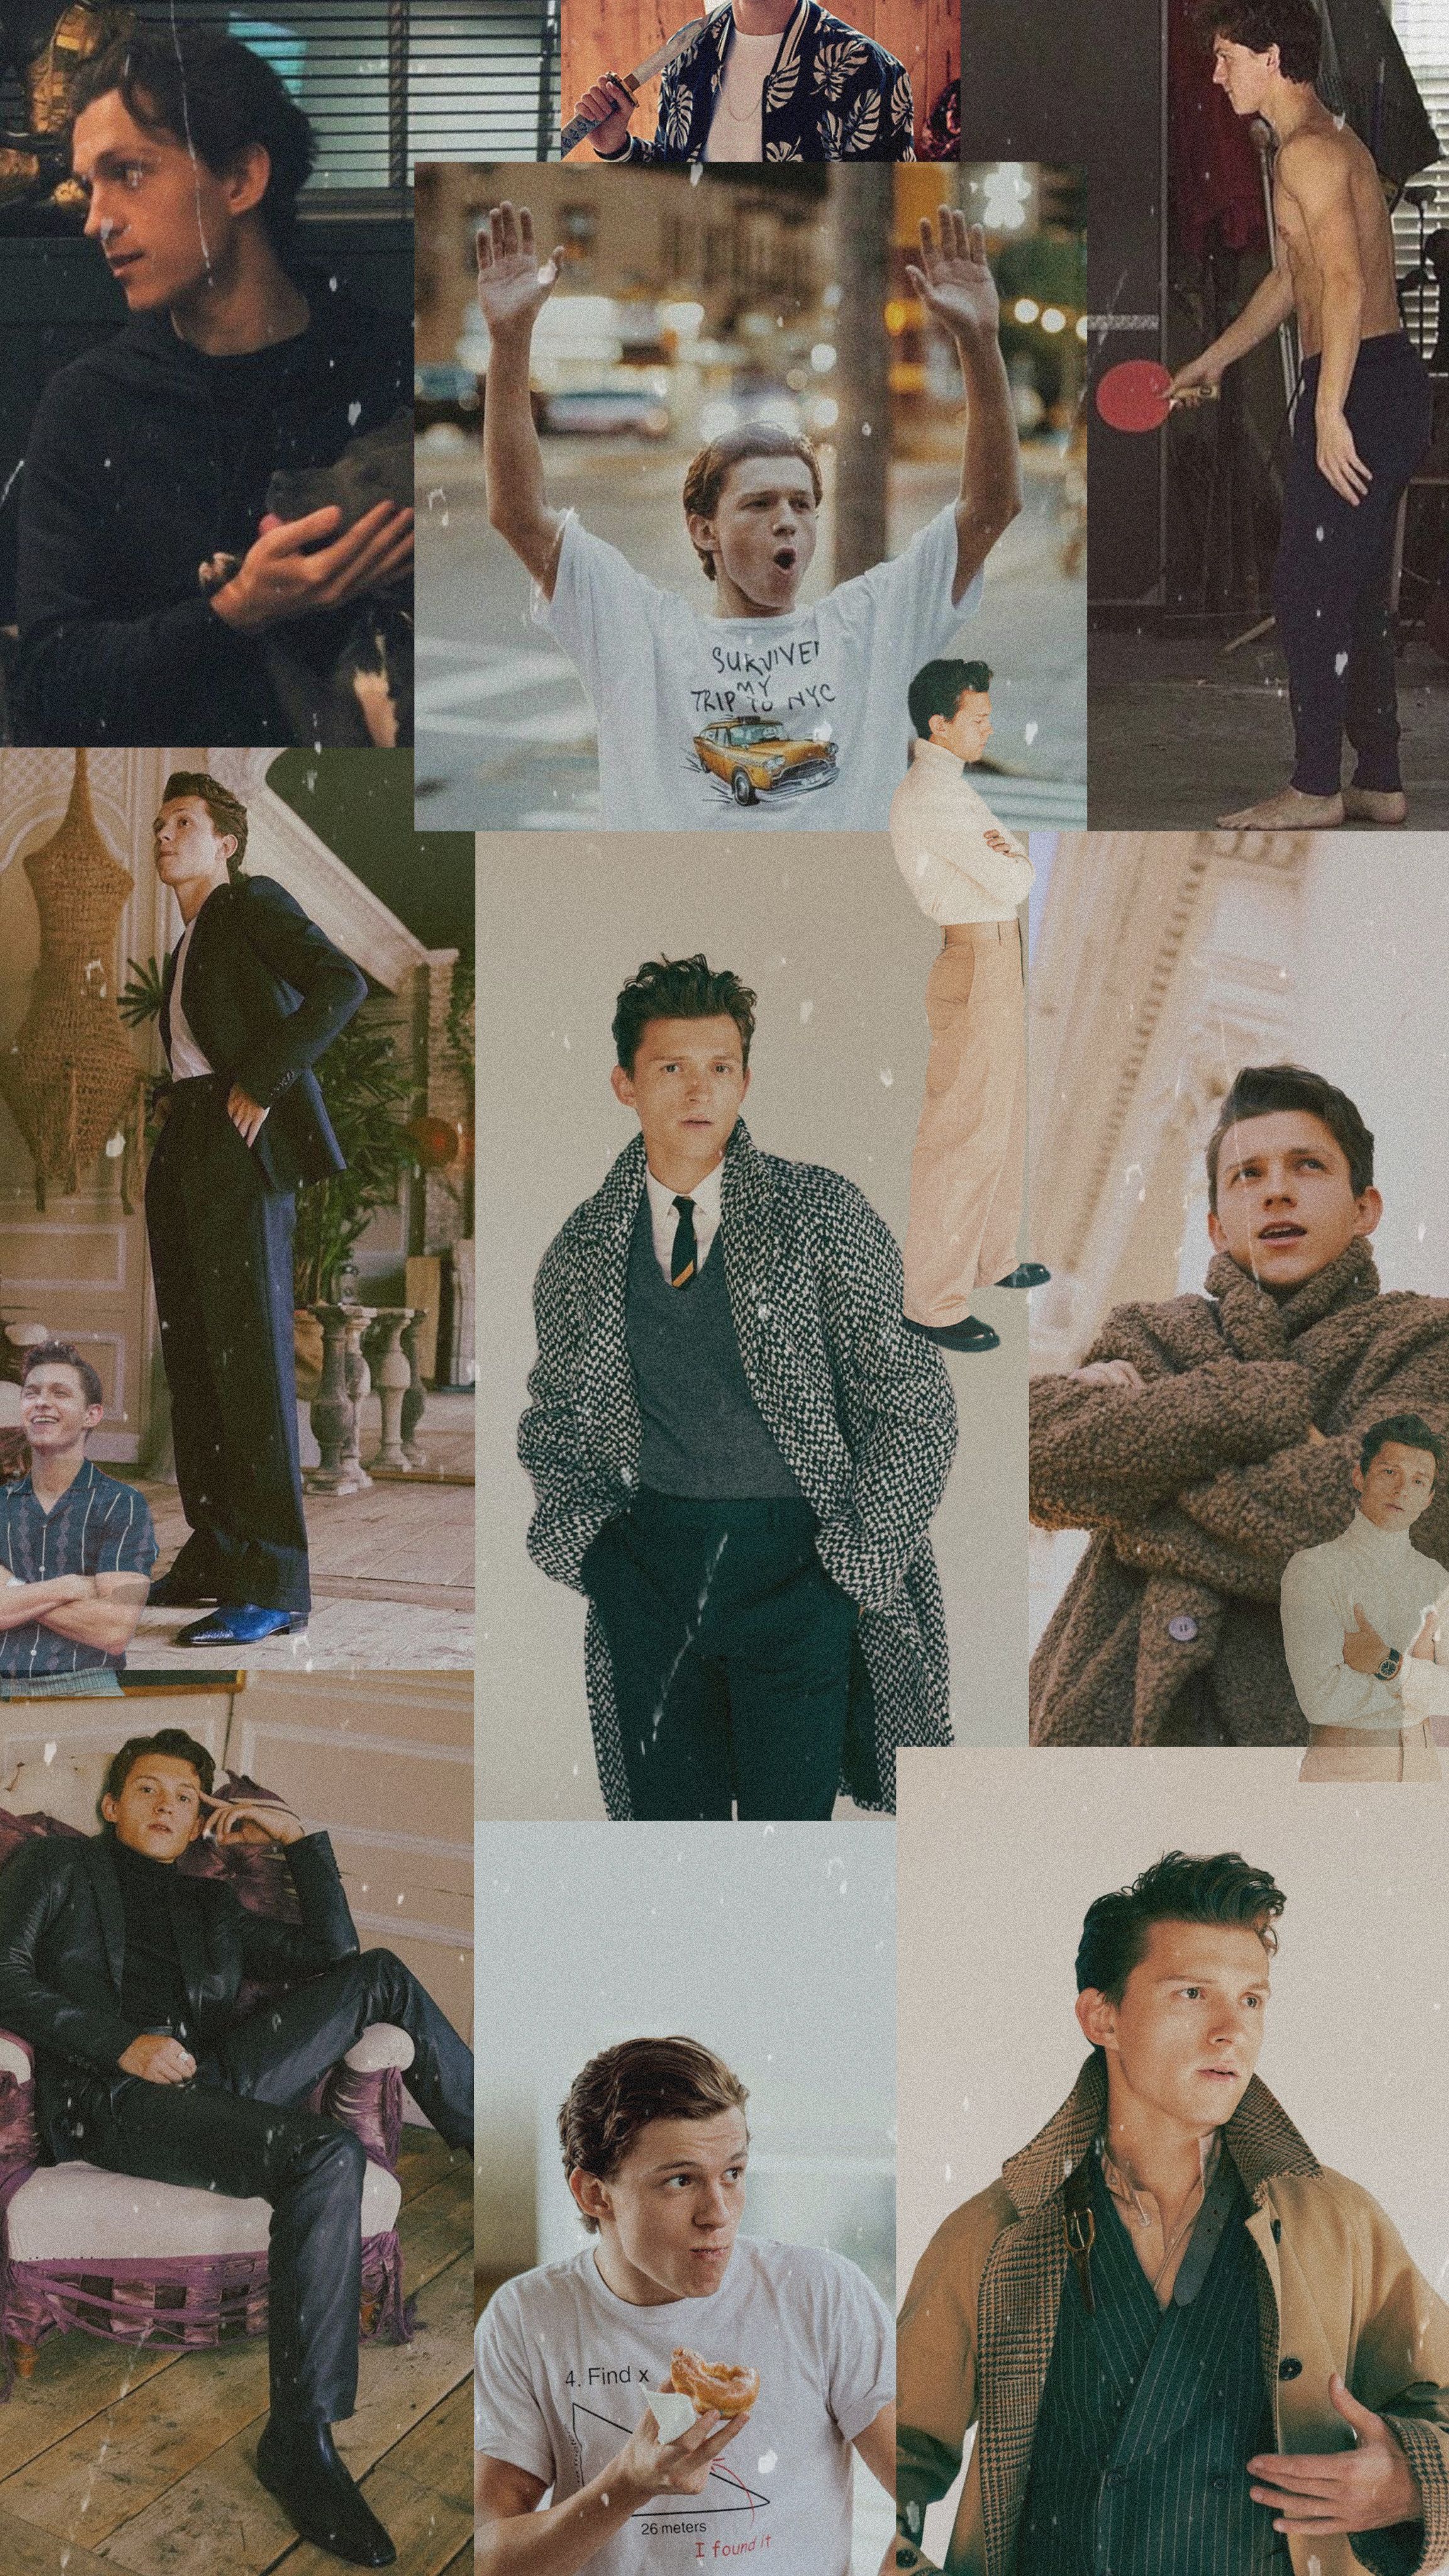 Tom Holland is a famous actor and model. - Tom Holland